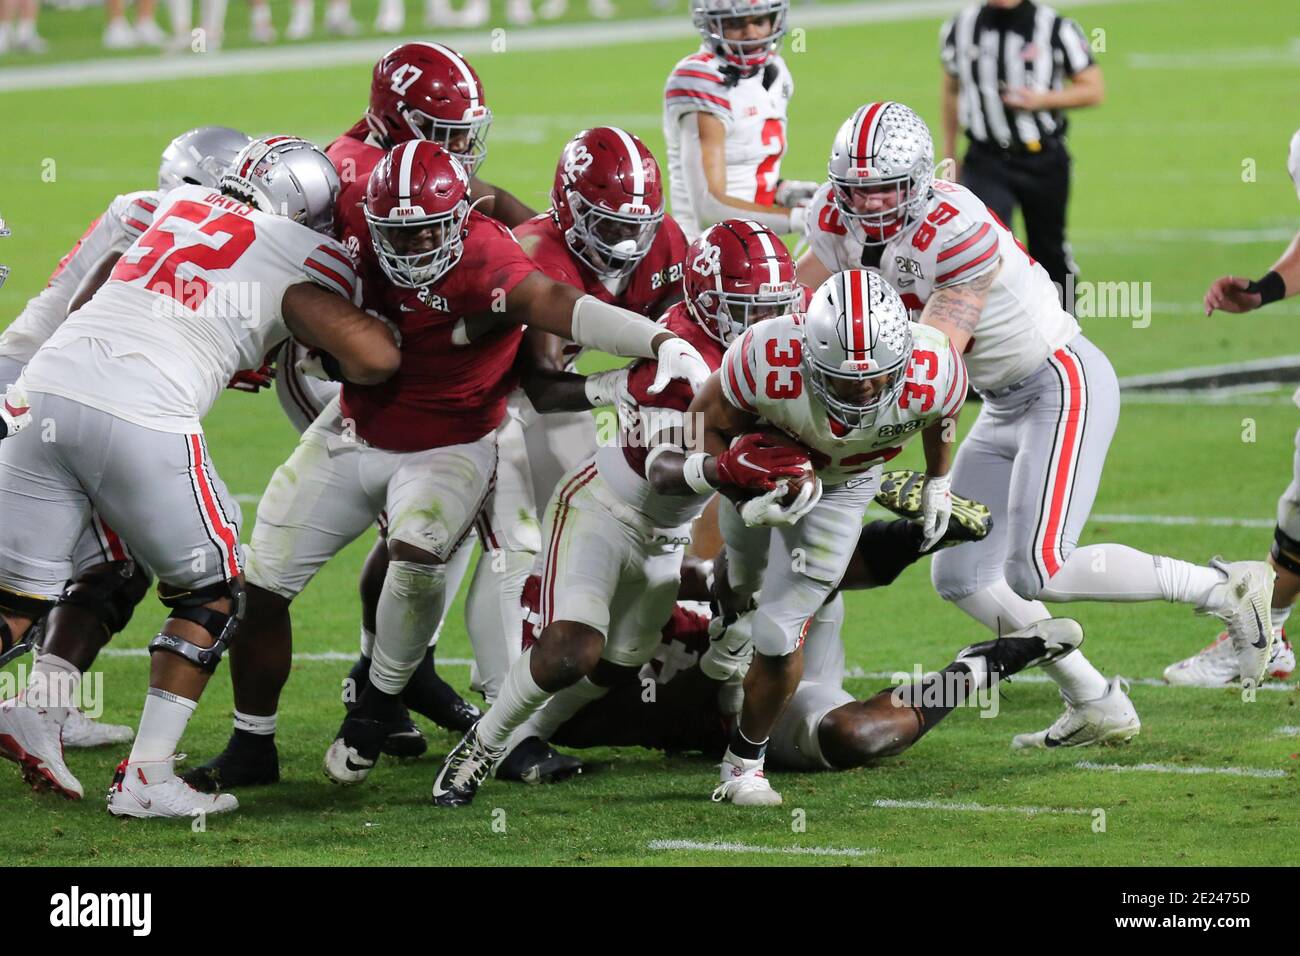 January 11, 2021: Ohio State Buckeyes running back MASTER TEAGUE III (33) runs up the middle during the College Football Playoff National Championship at Hard Rock Stadium in Miami Gardens, Florida. Credit: Cory Knowlton/ZUMA Wire/Alamy Live News Stock Photo